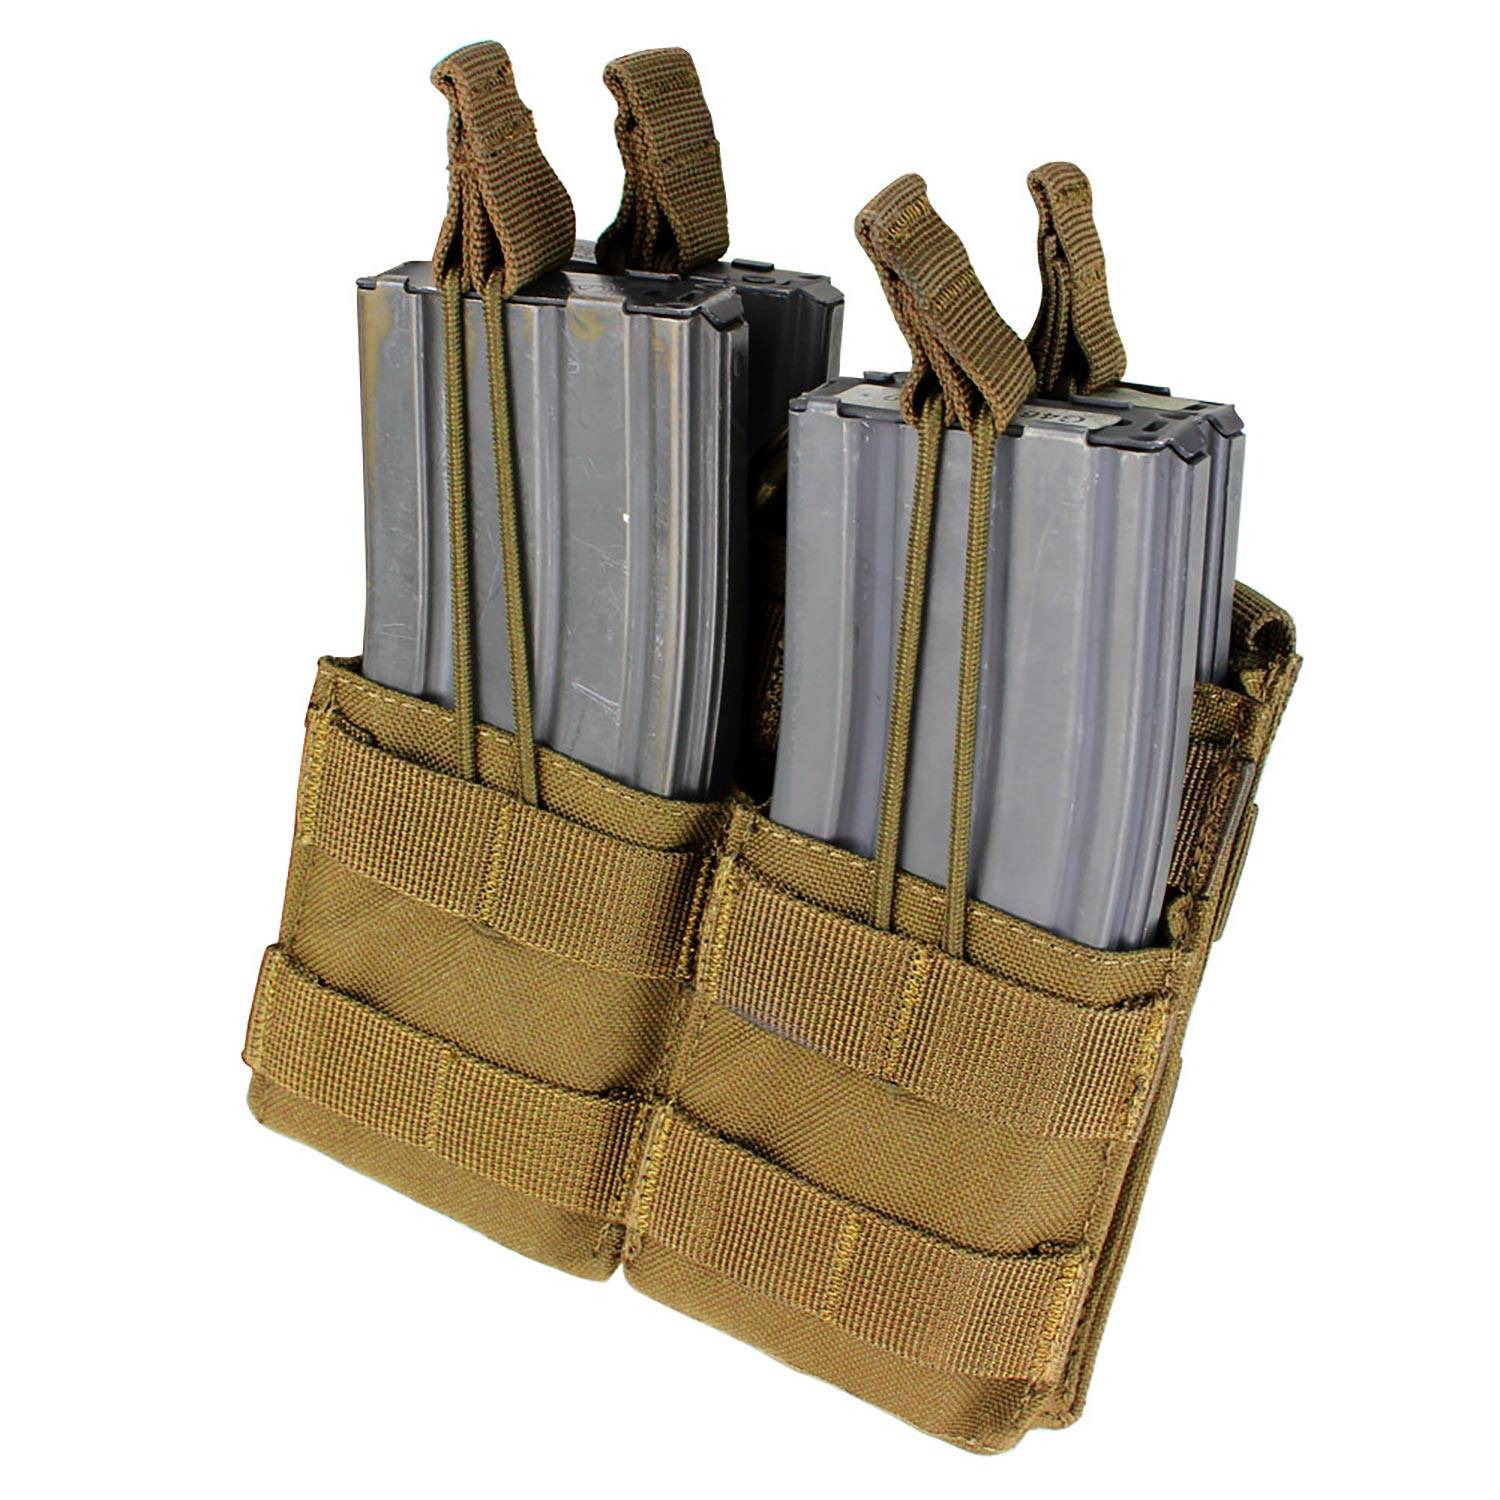 CONDOR DOUBLE STACKER OPEN-TOP M4 MAG POUCH